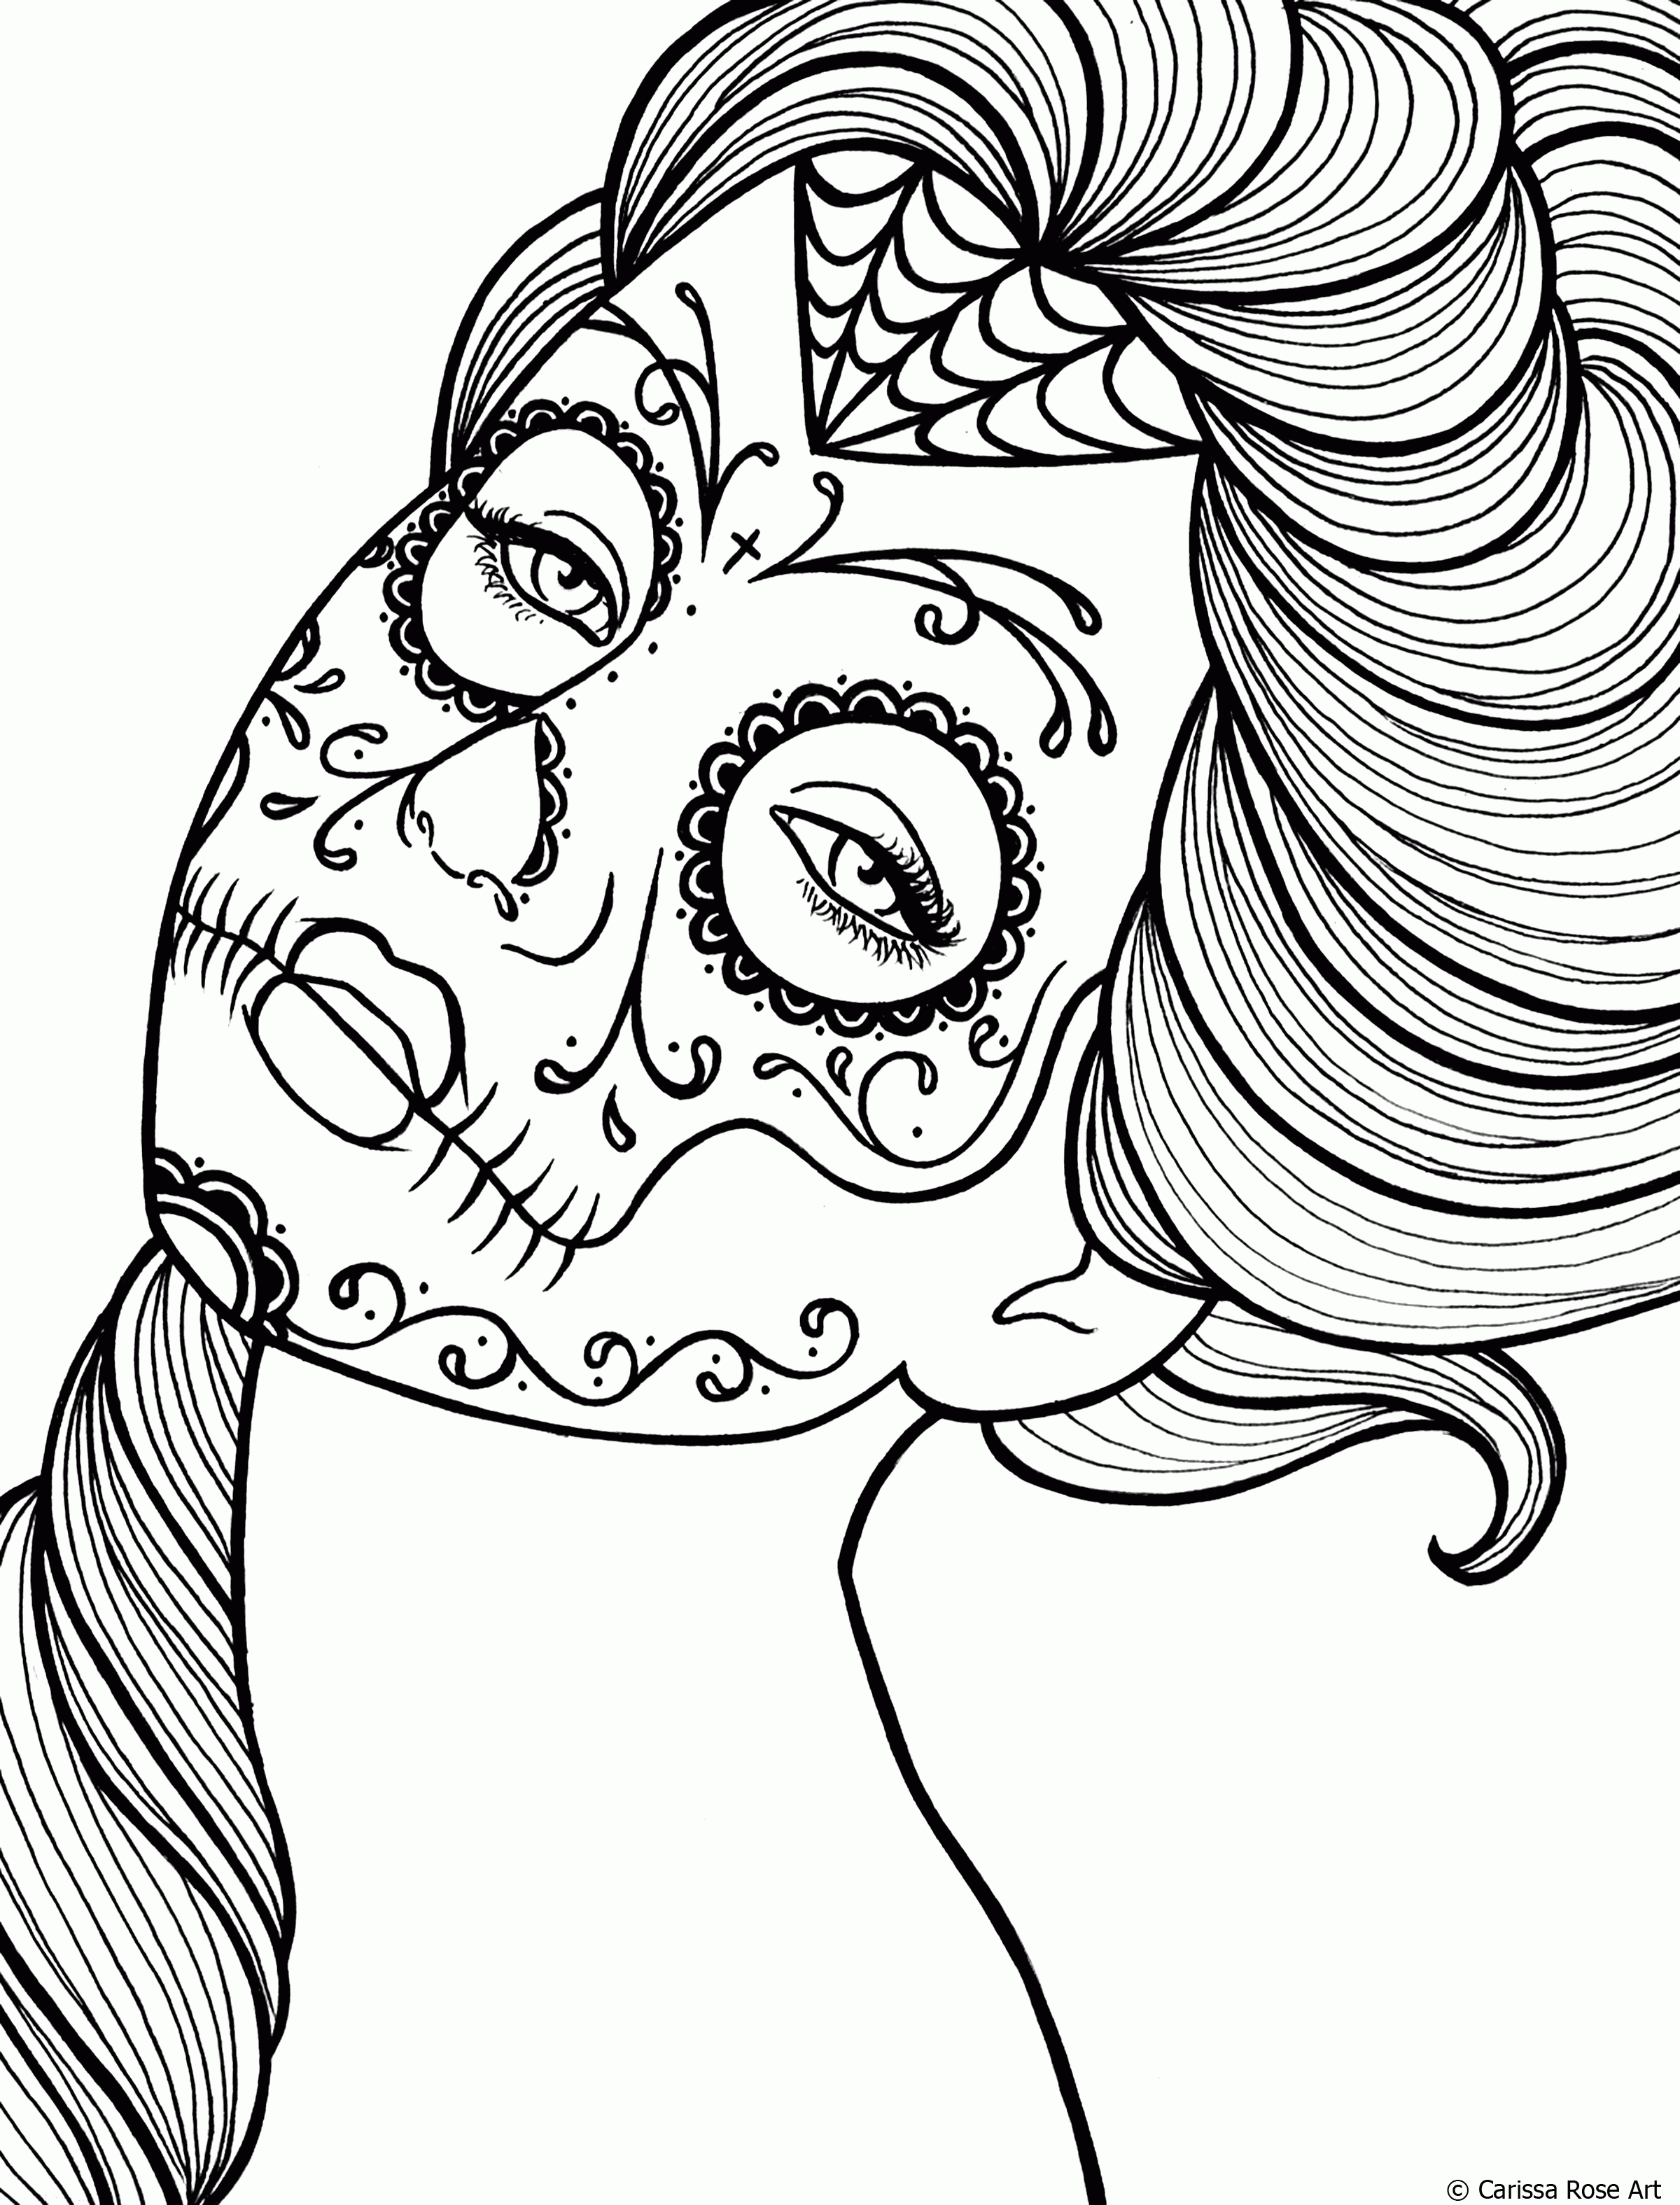 10 Pics of Day Of The Dead Girl Skull Coloring Pages - Day of the ...